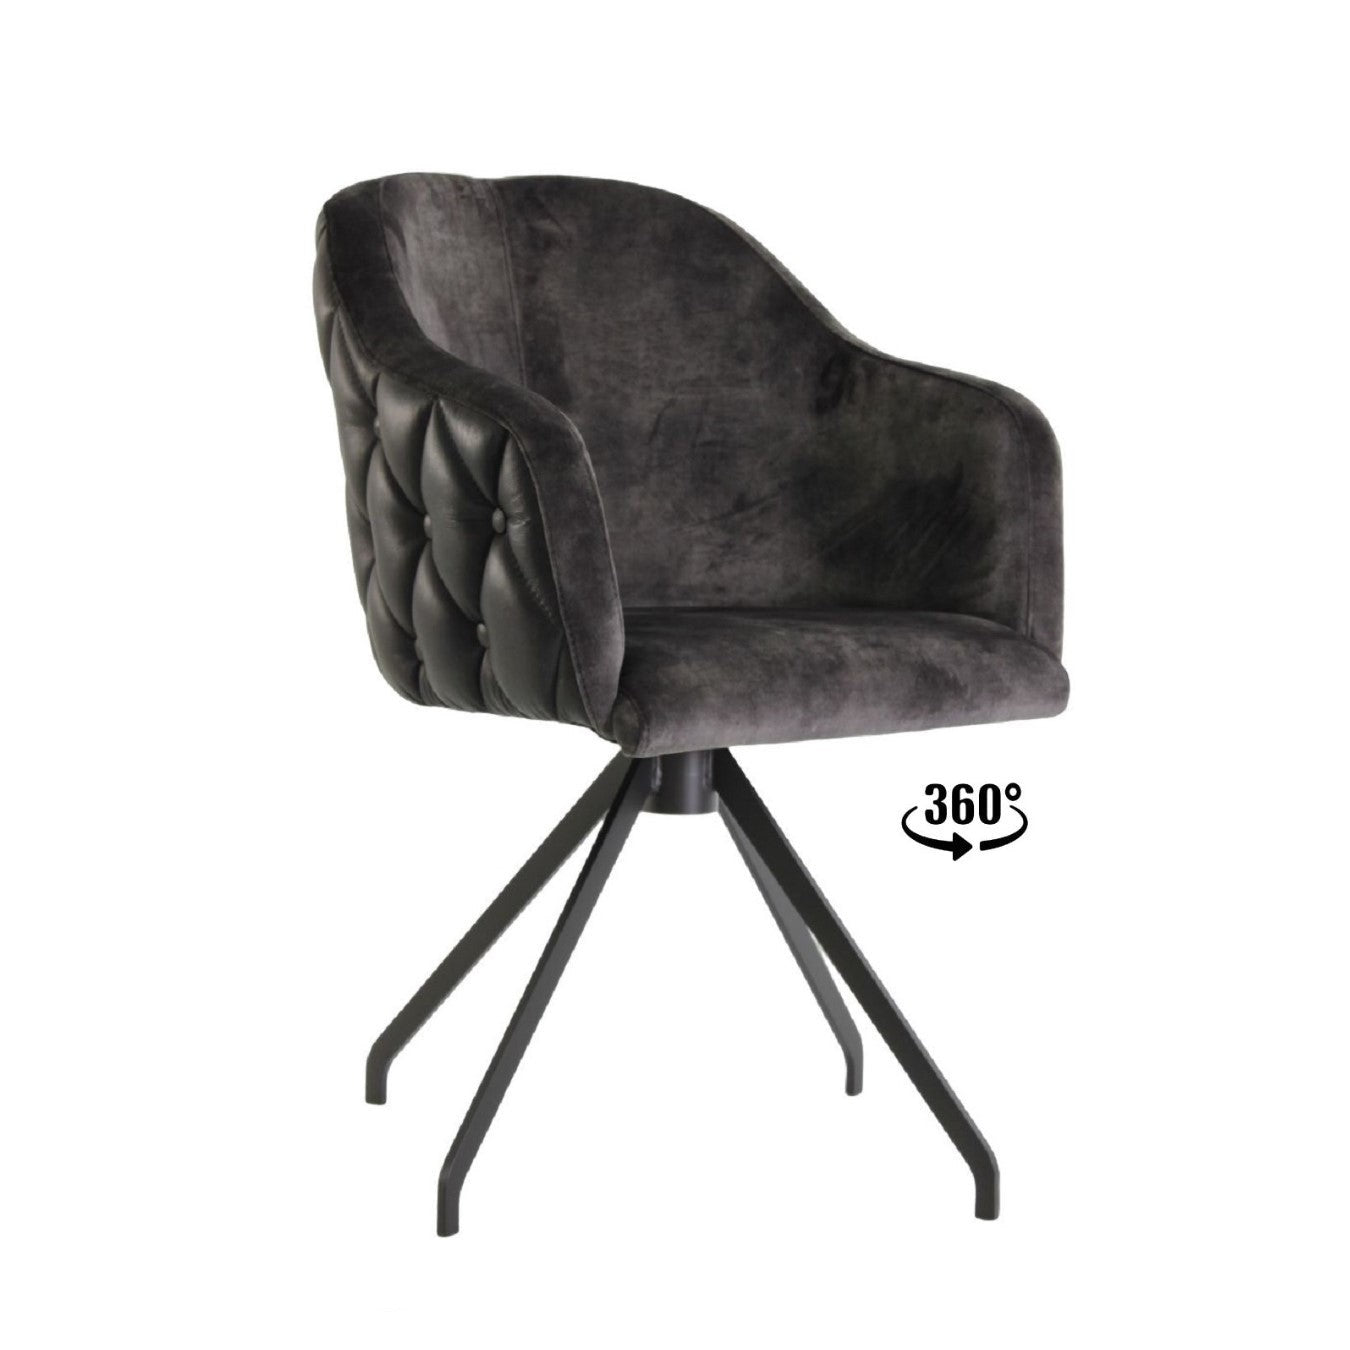 Dining chair made of fabric and leather with steel frame | Model AURORA I